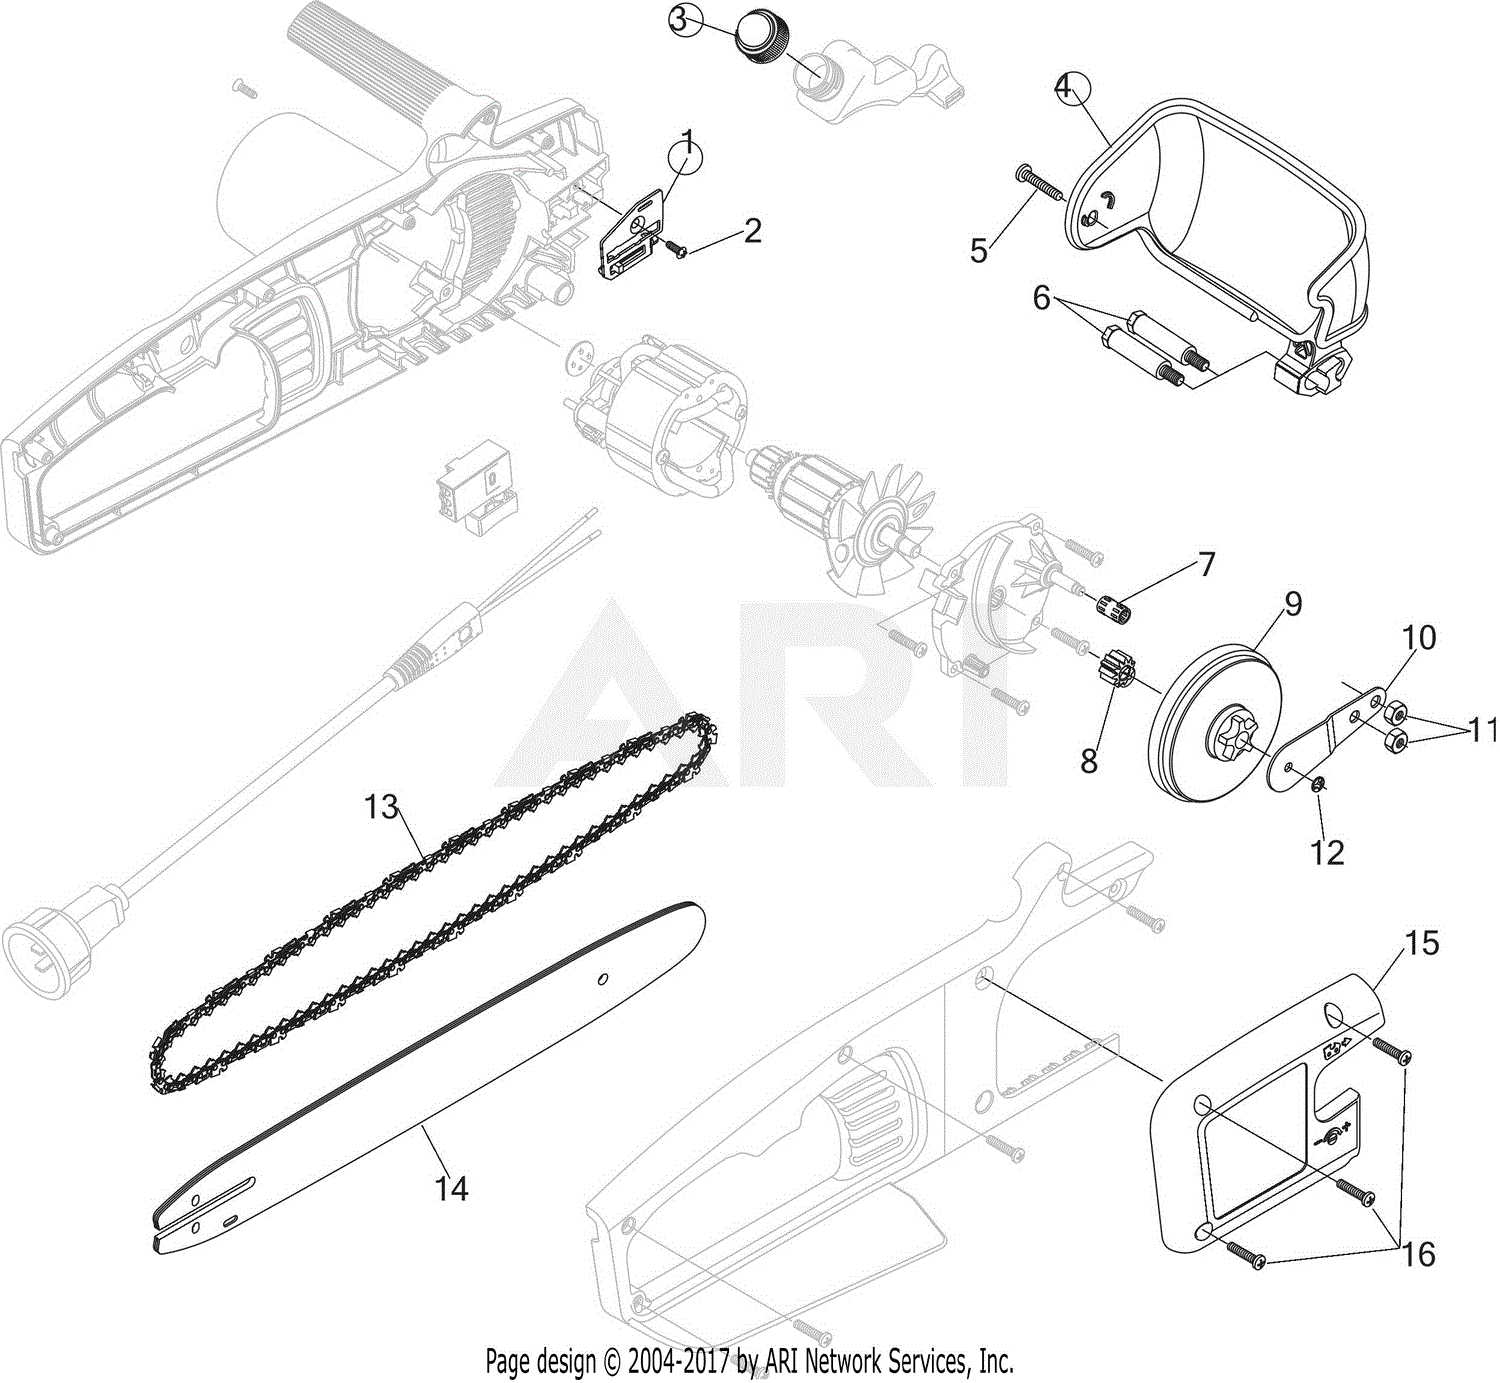 Remington Electric Chainsaw Parts Diagram - Wiring Site Resource